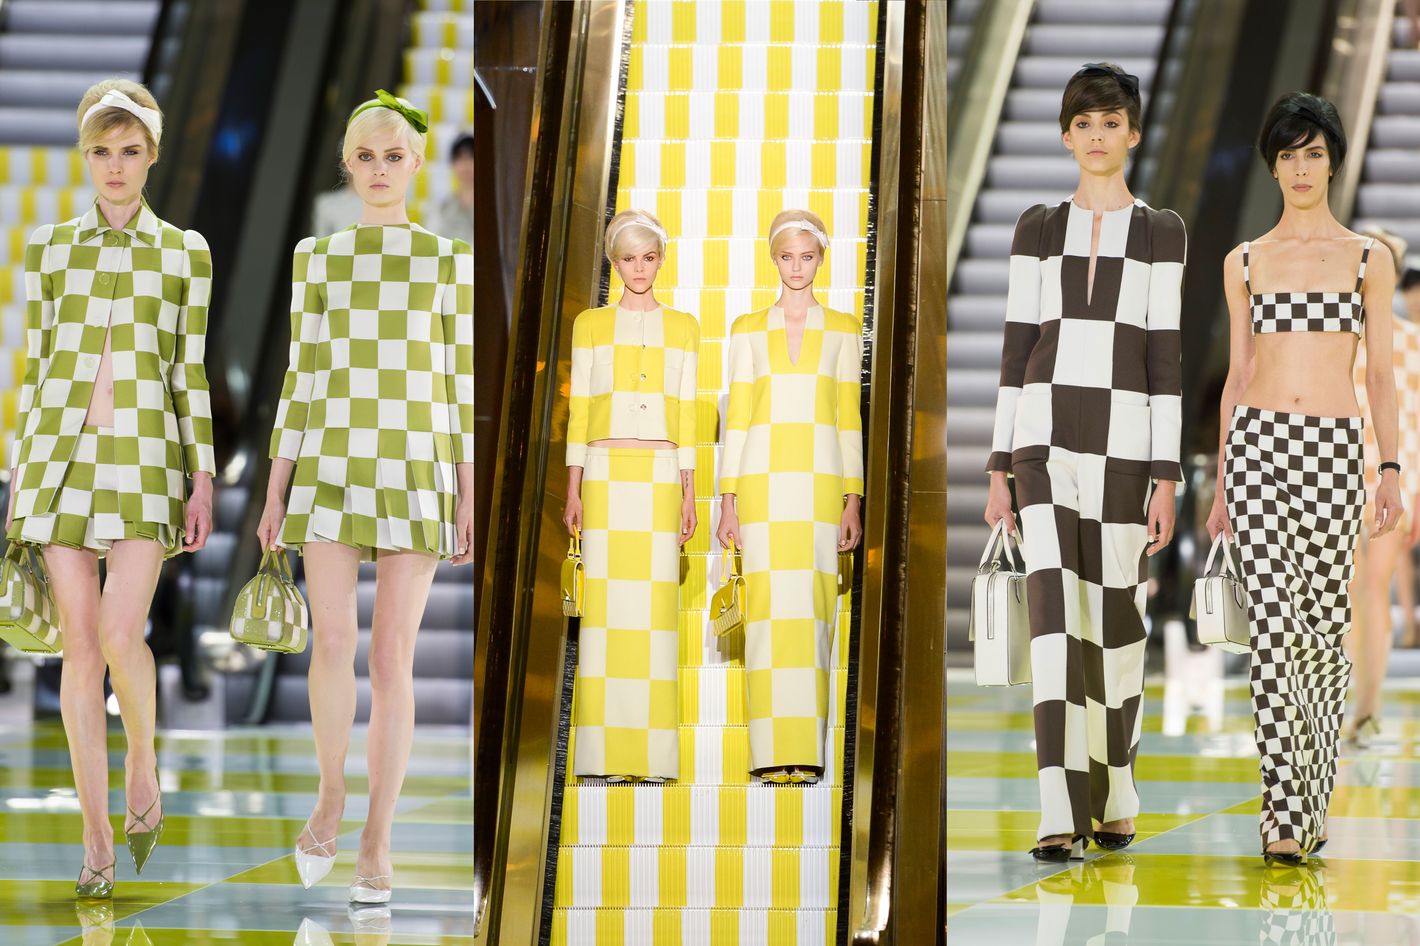 Marc Jacobs shows stunning final collection for Louis Vuitton